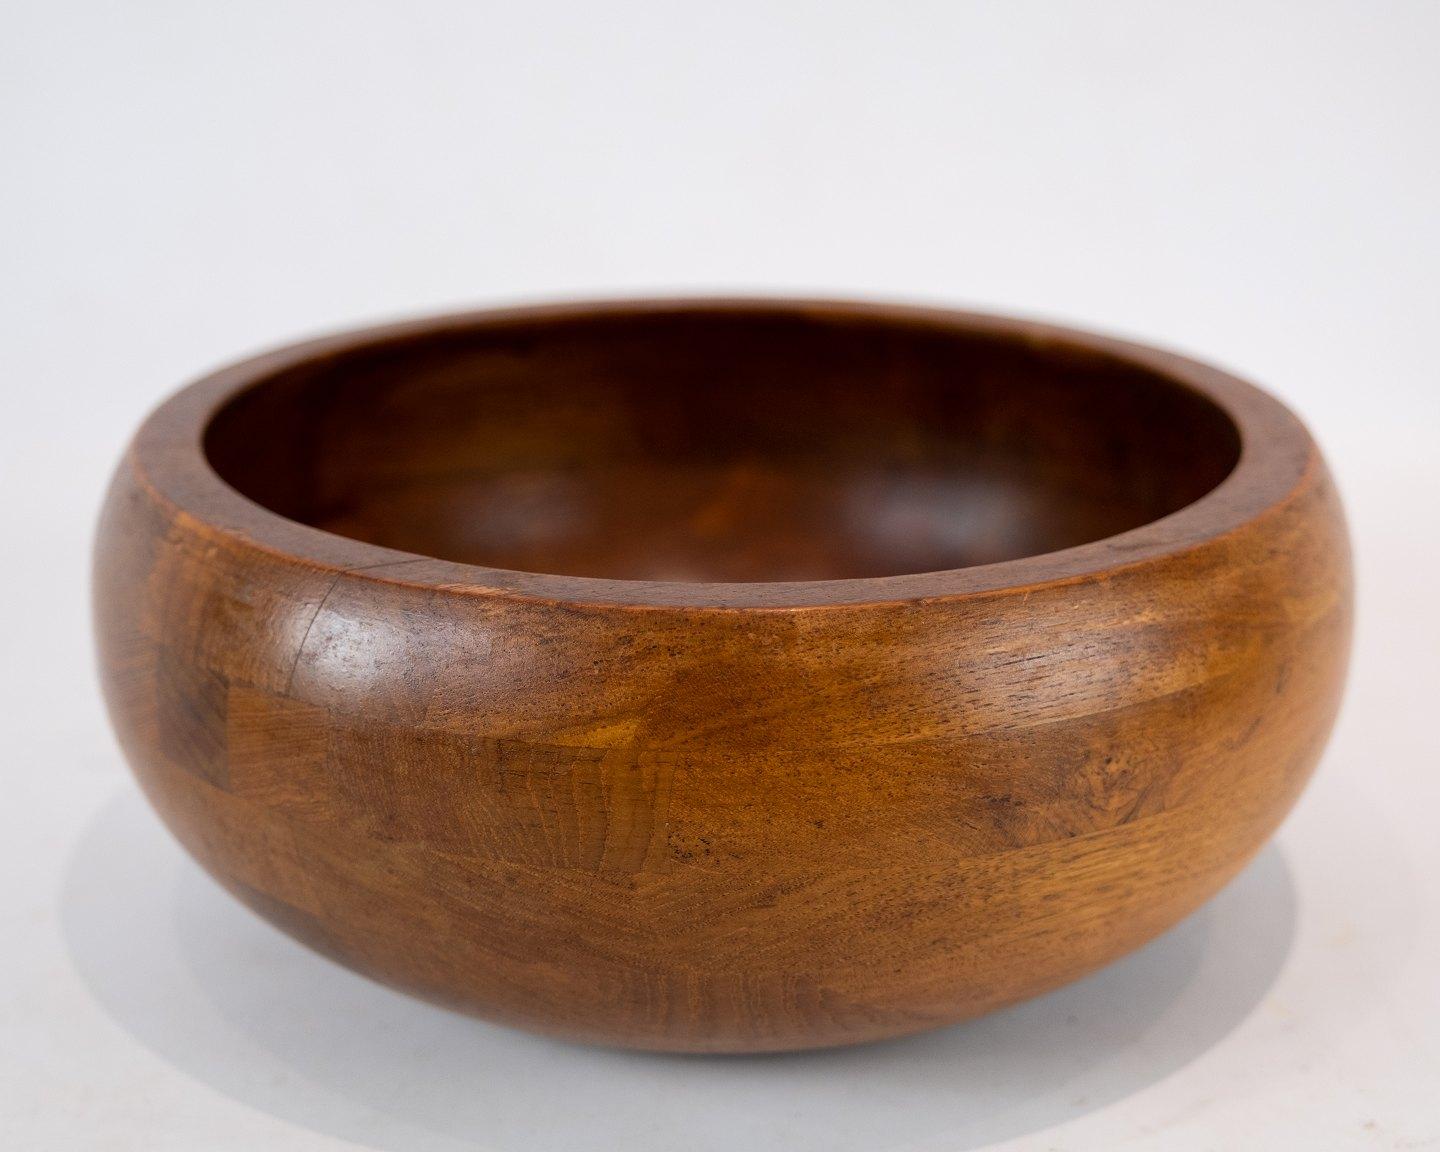 
 
This teak bowl, designed by Jens Harald Quistgaard in the 1960s, is a stunning example of mid-century Danish design.

Crafted from rich teak wood, the bowl exudes warmth and natural beauty, adding a touch of organic elegance to any space. Its